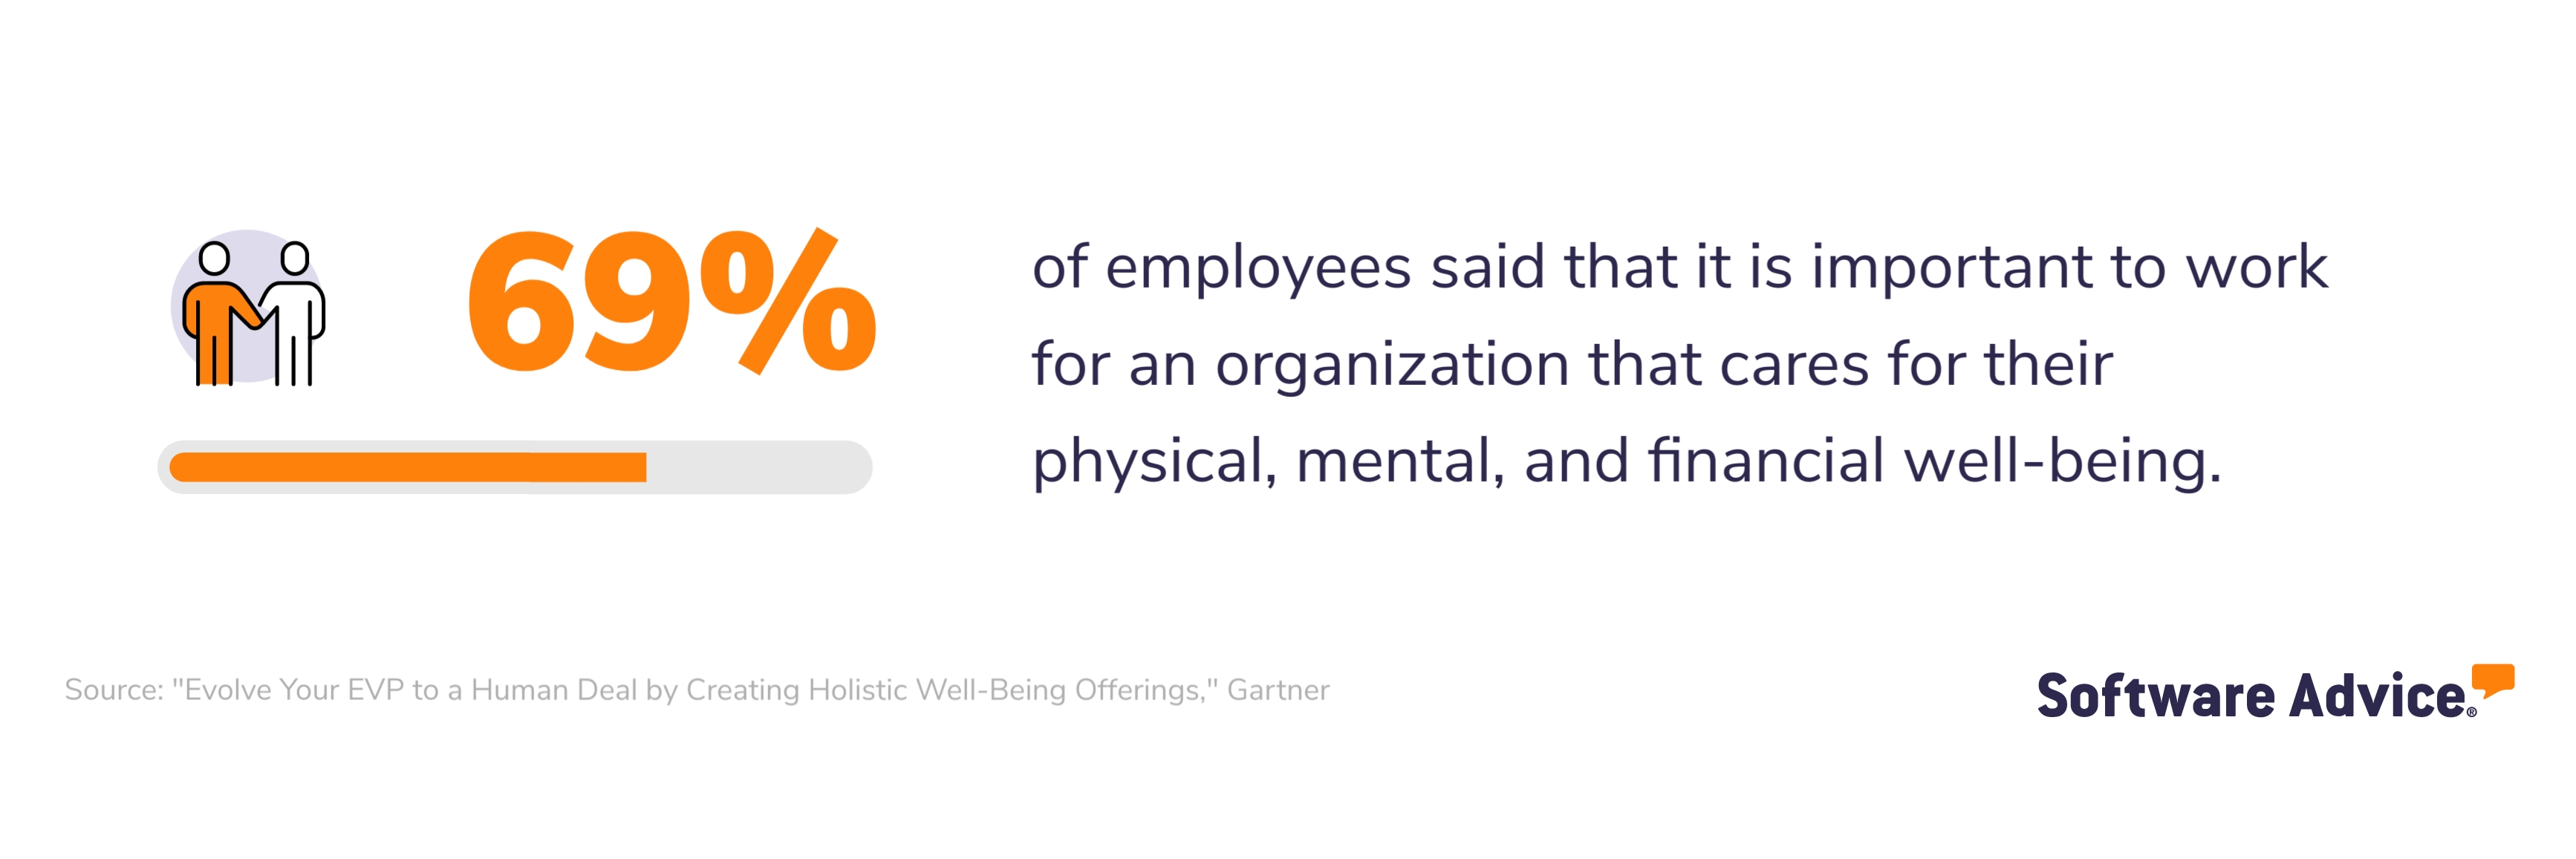 69% of employees said that it is important to work for an organization that cares for their physical, mental, and financial well-being